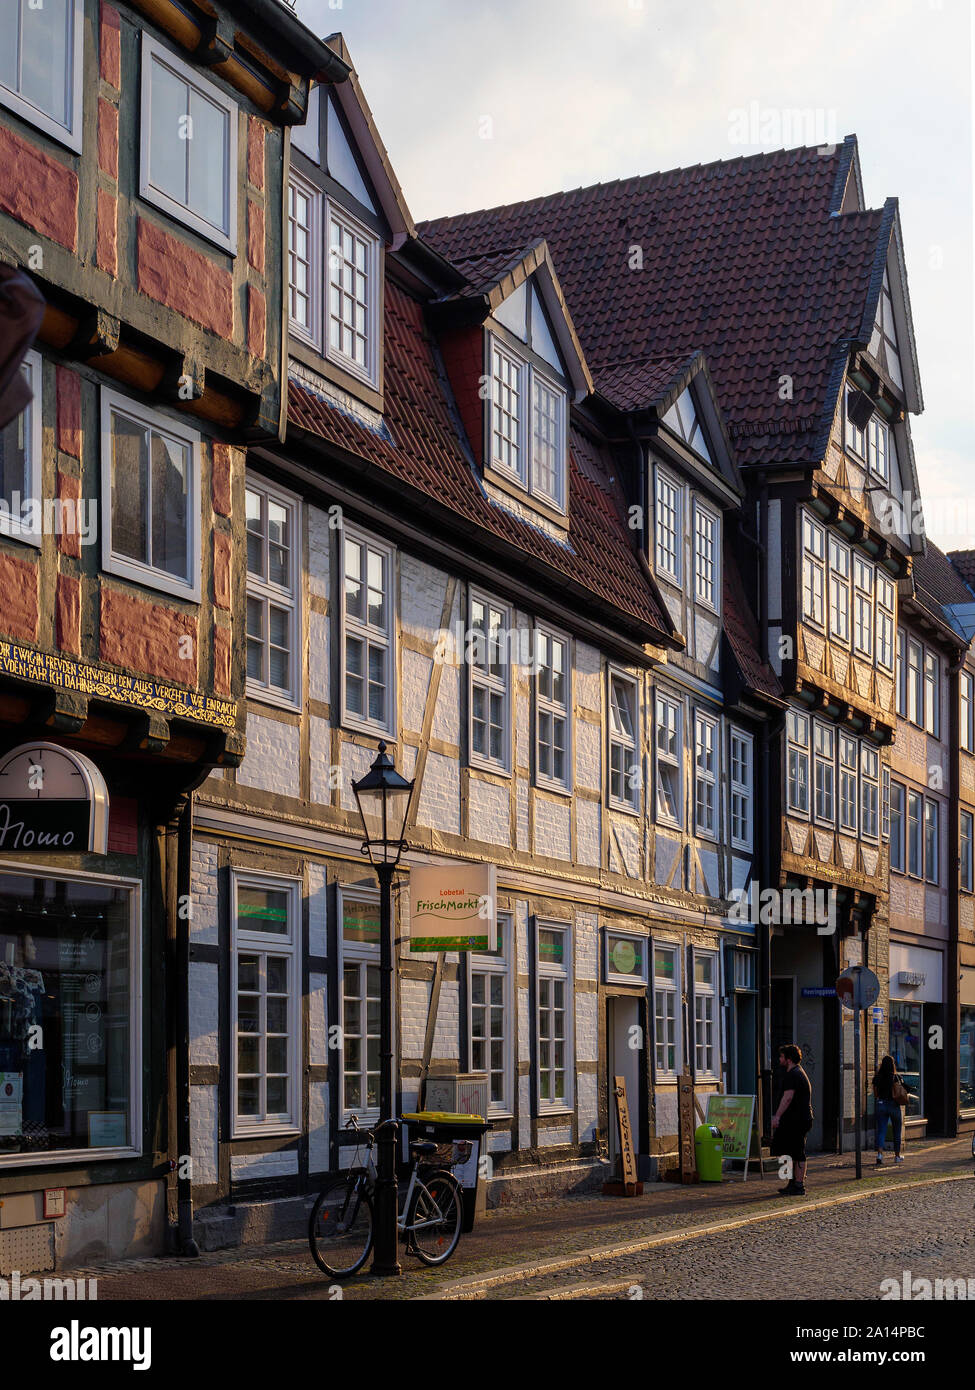 half timbered houses, Berg St., Celle, Lower Saxony, Germany, Europe Stock Photo